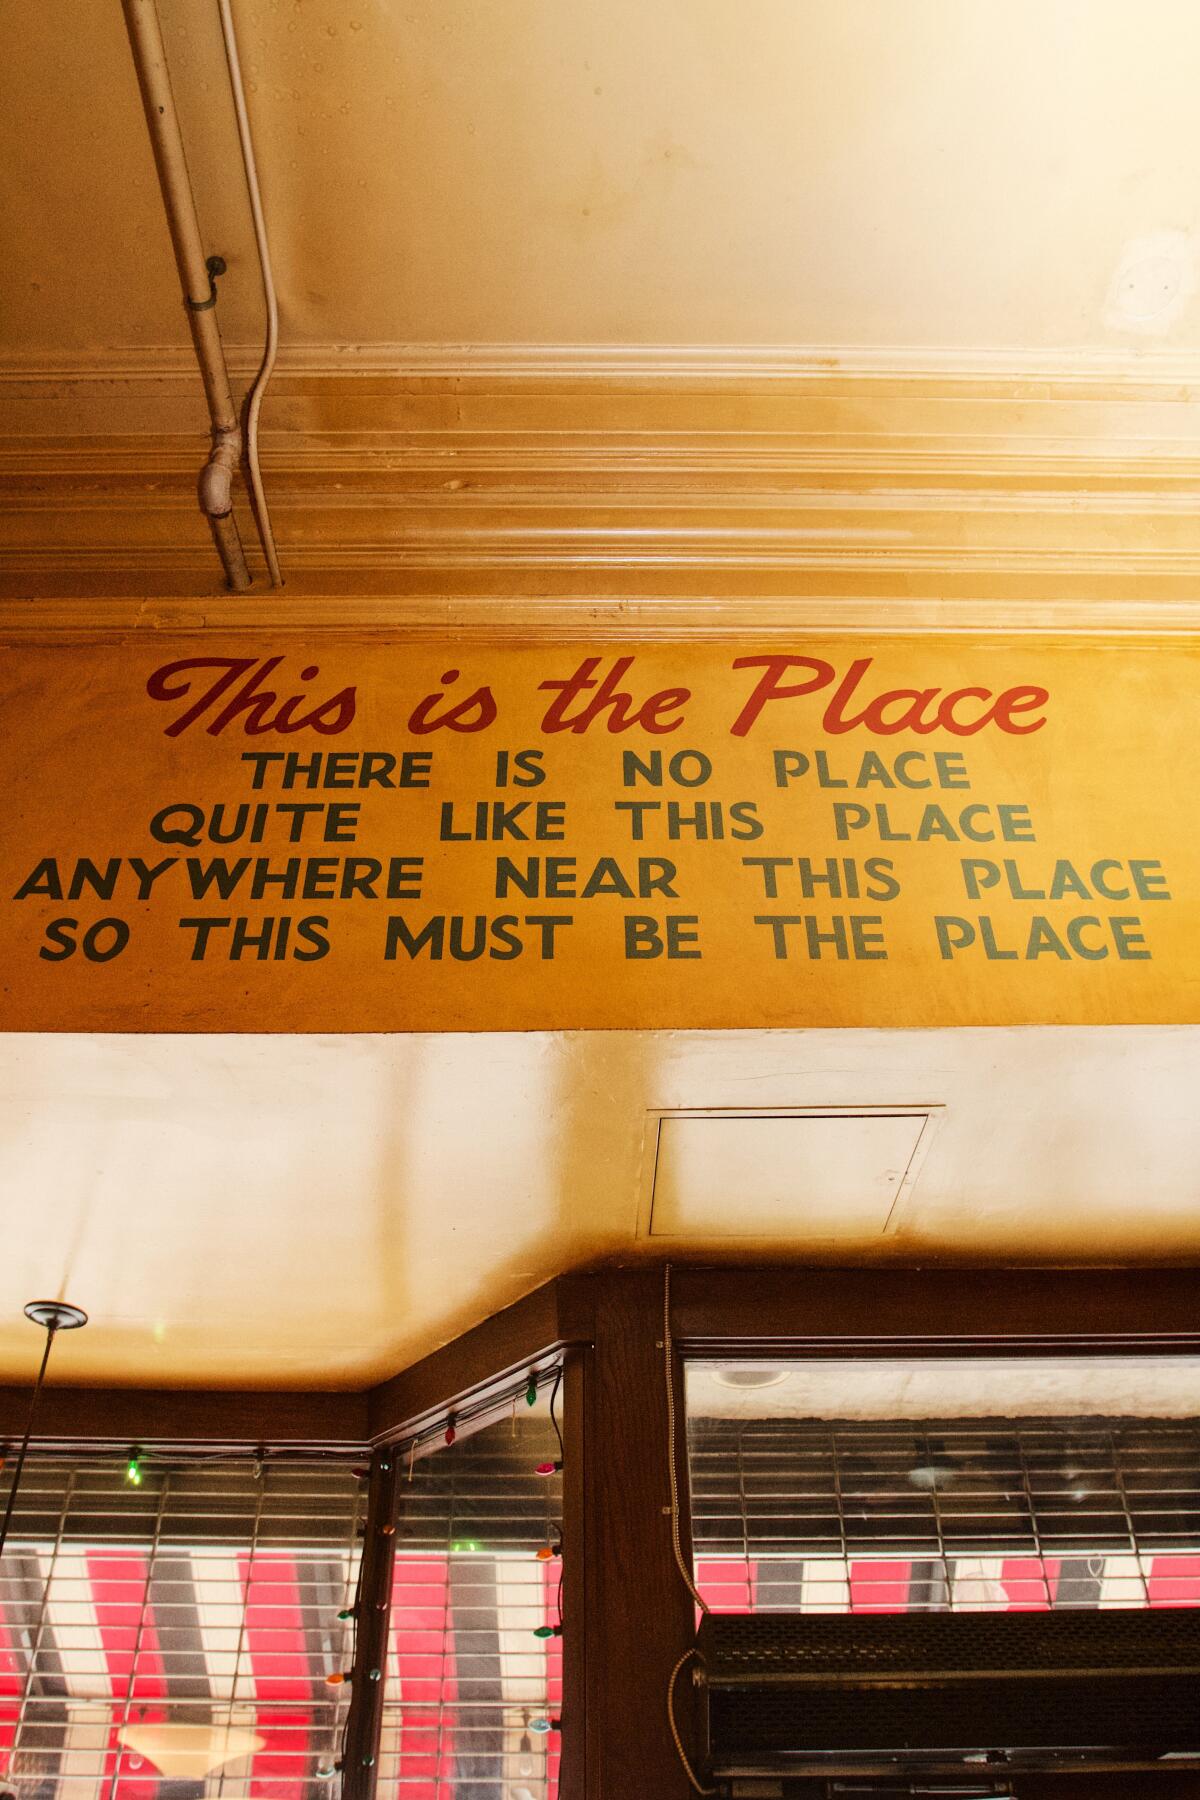 A sign that says “This is the place, there is no place / quite like this place anywhere near this place" above the front door